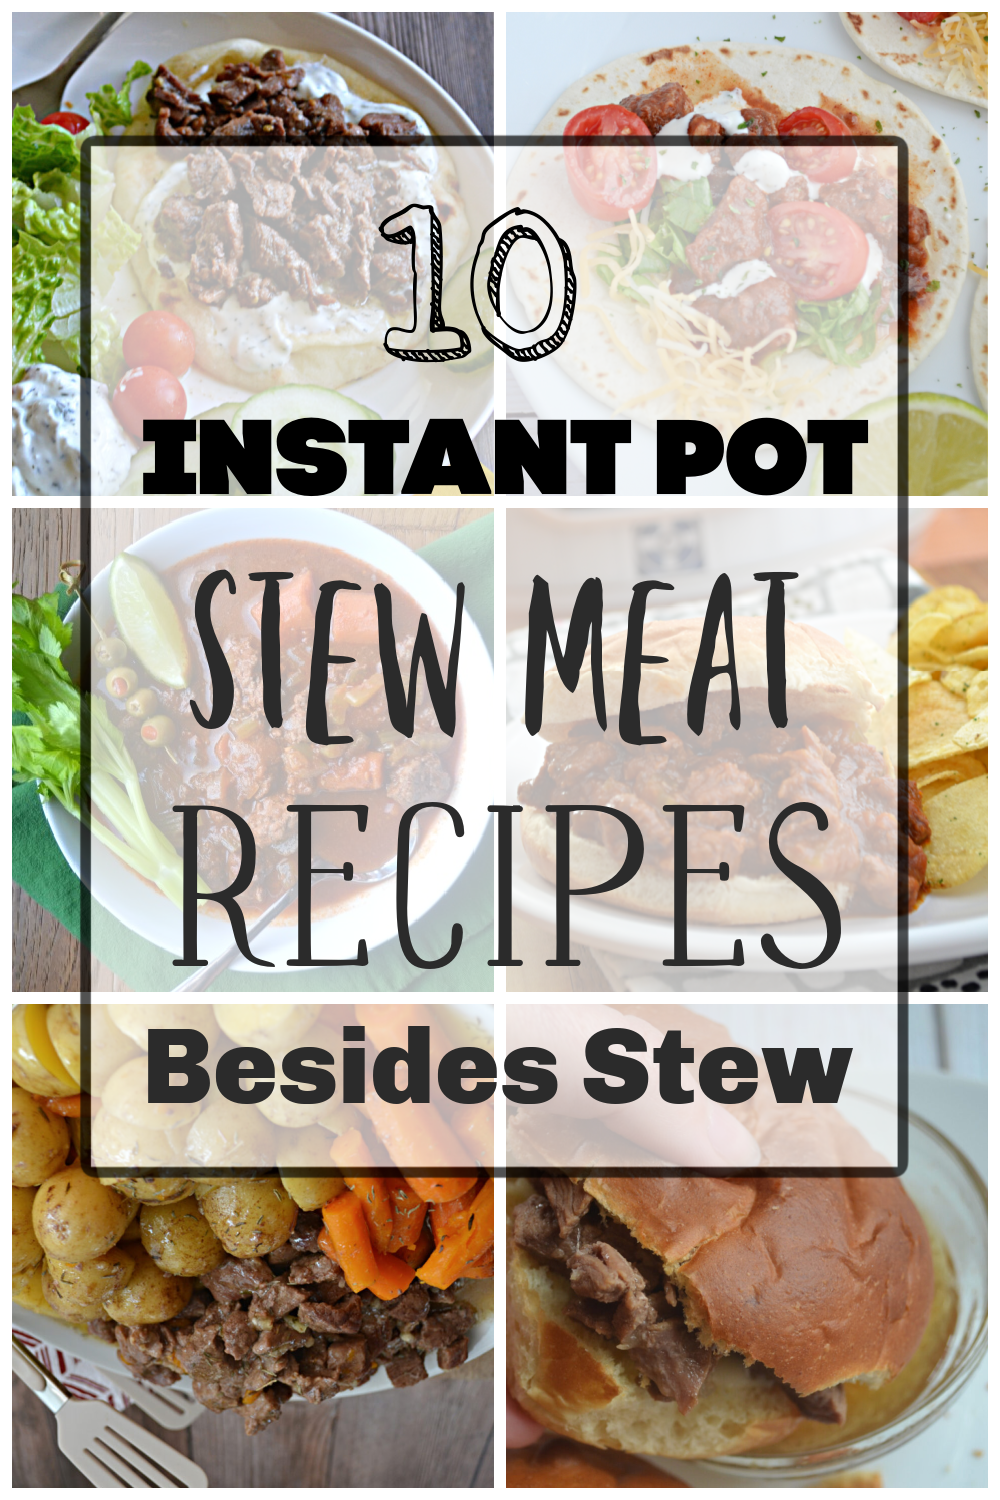 10 Instant Pot Stew Meat Recipes Besides Stew